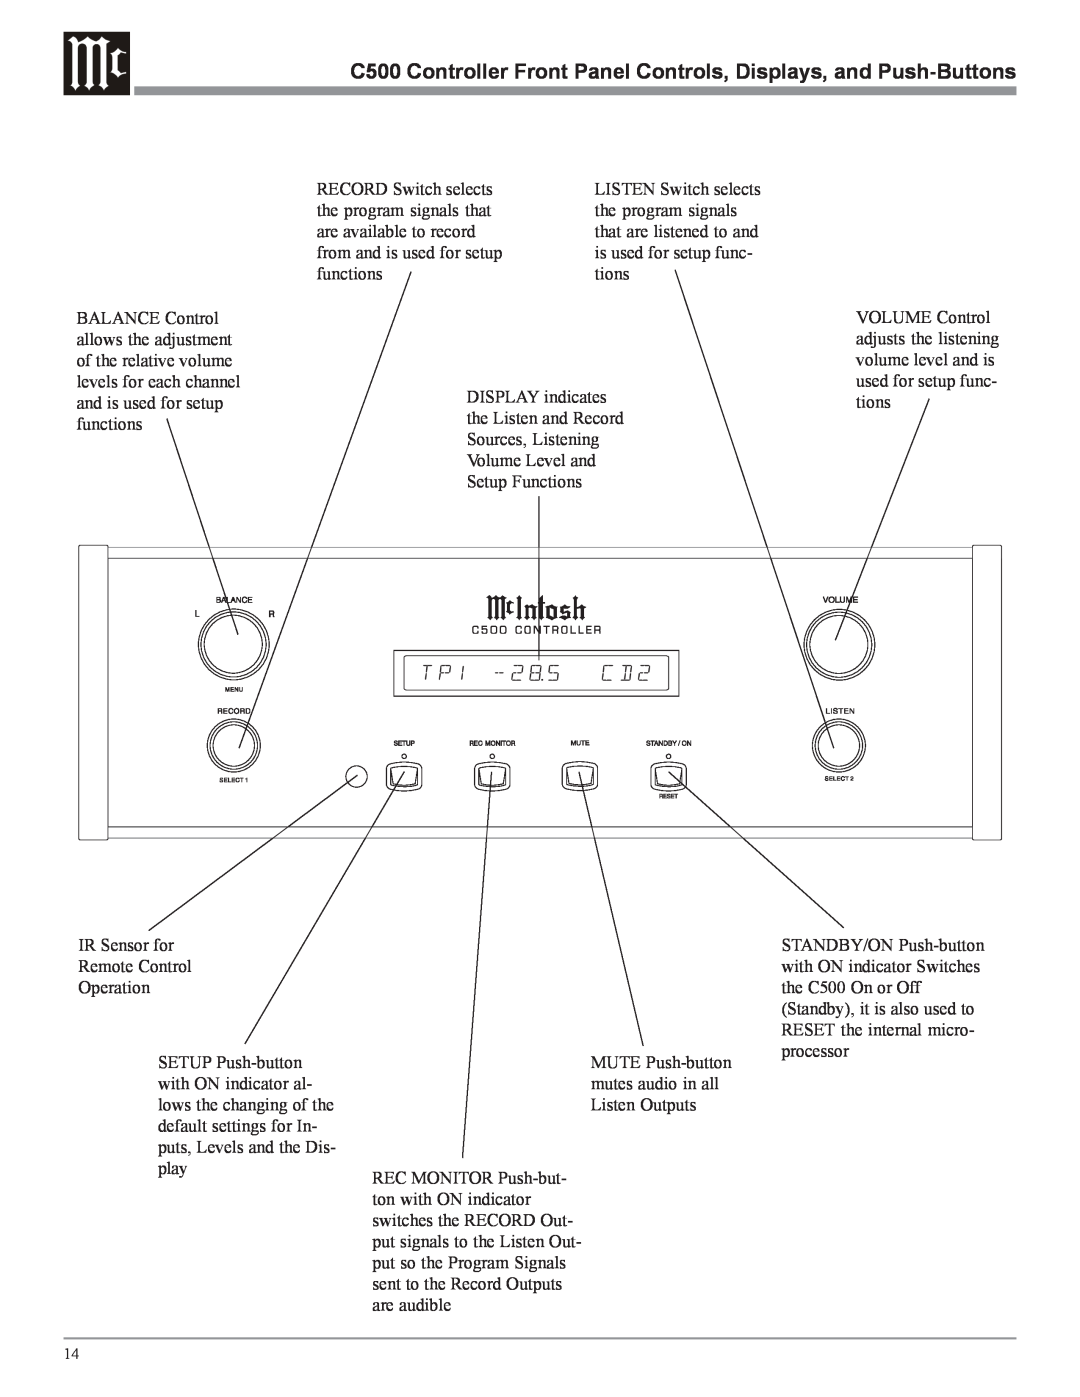 McIntosh C500 owner manual RECORD Switch selects 